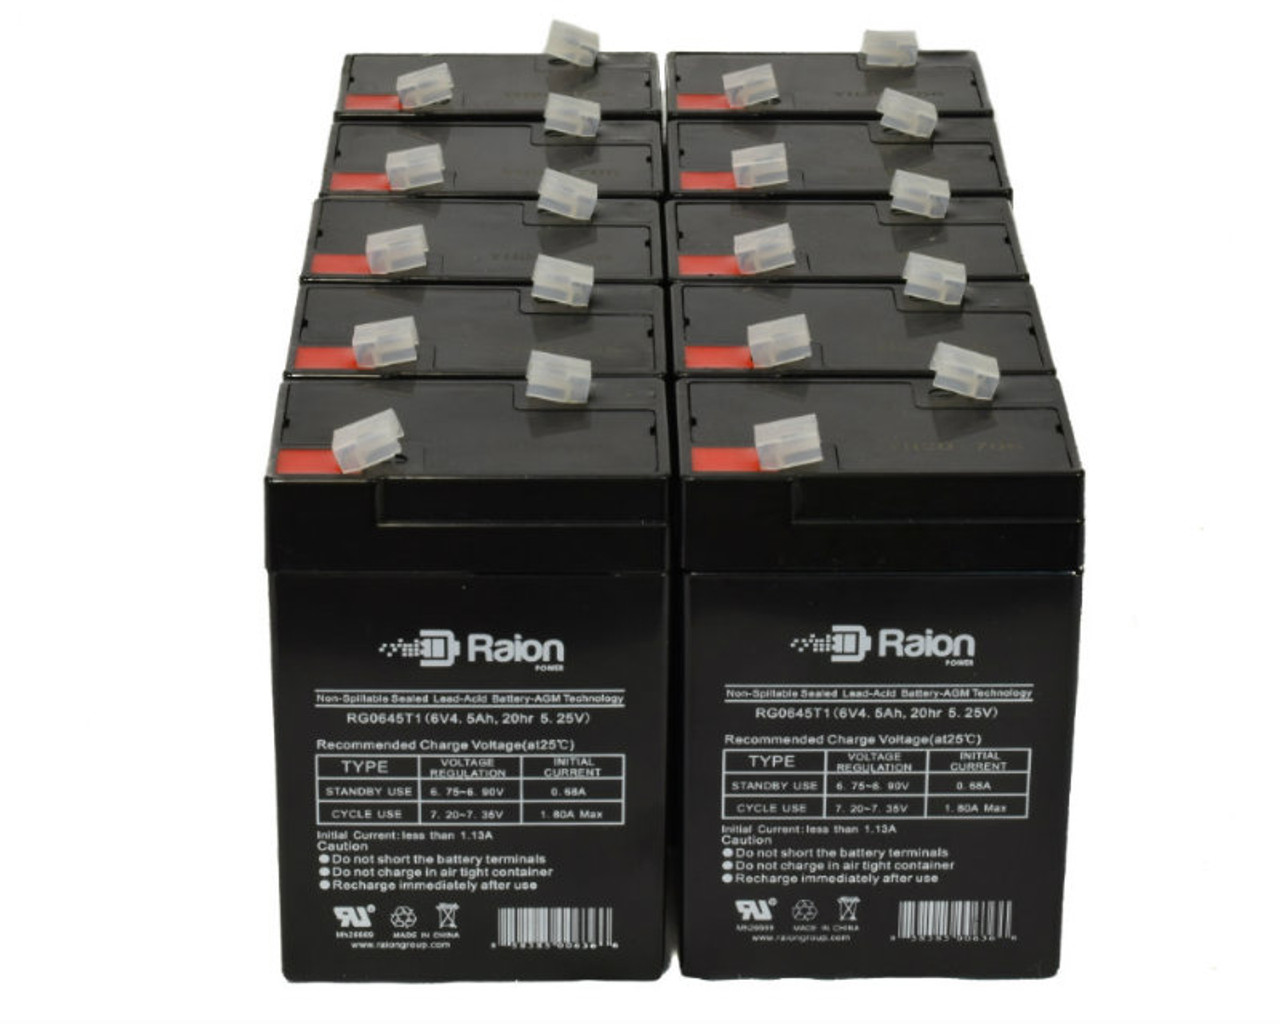 Raion Power 6 Volt 4.5Ah RG0645T1 Replacement Battery for RYTON RT650 - 10 Pack